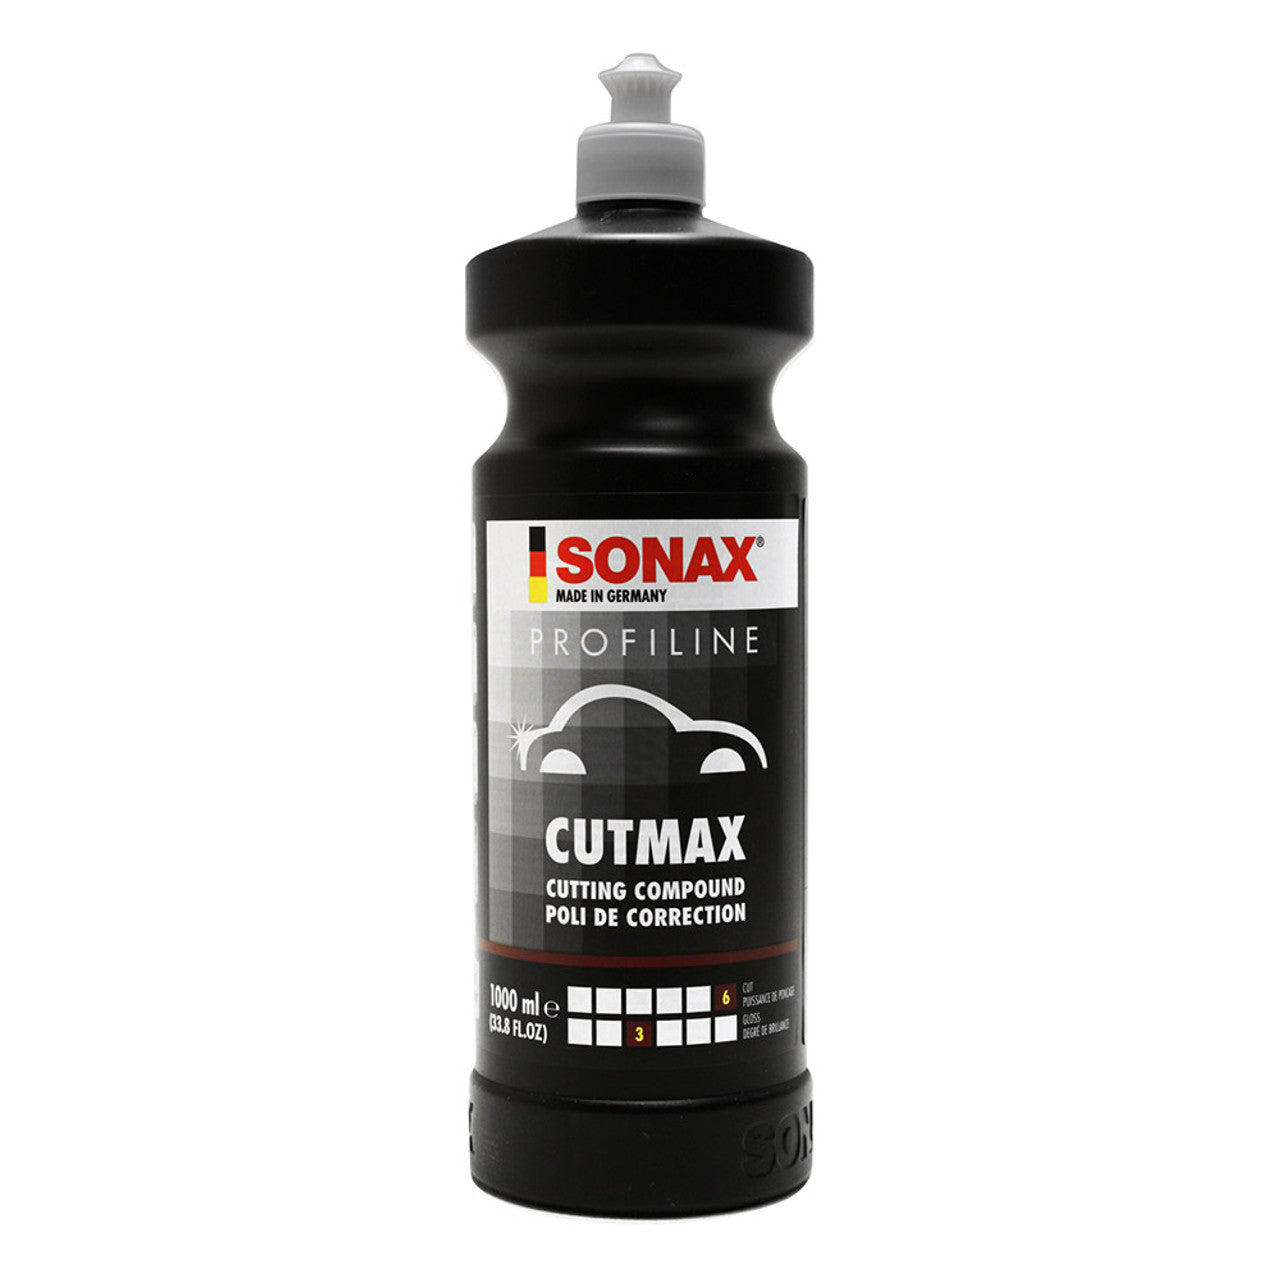 Sonax CutMax Cutting Compound - 1000ml - Sierra Madre Collection